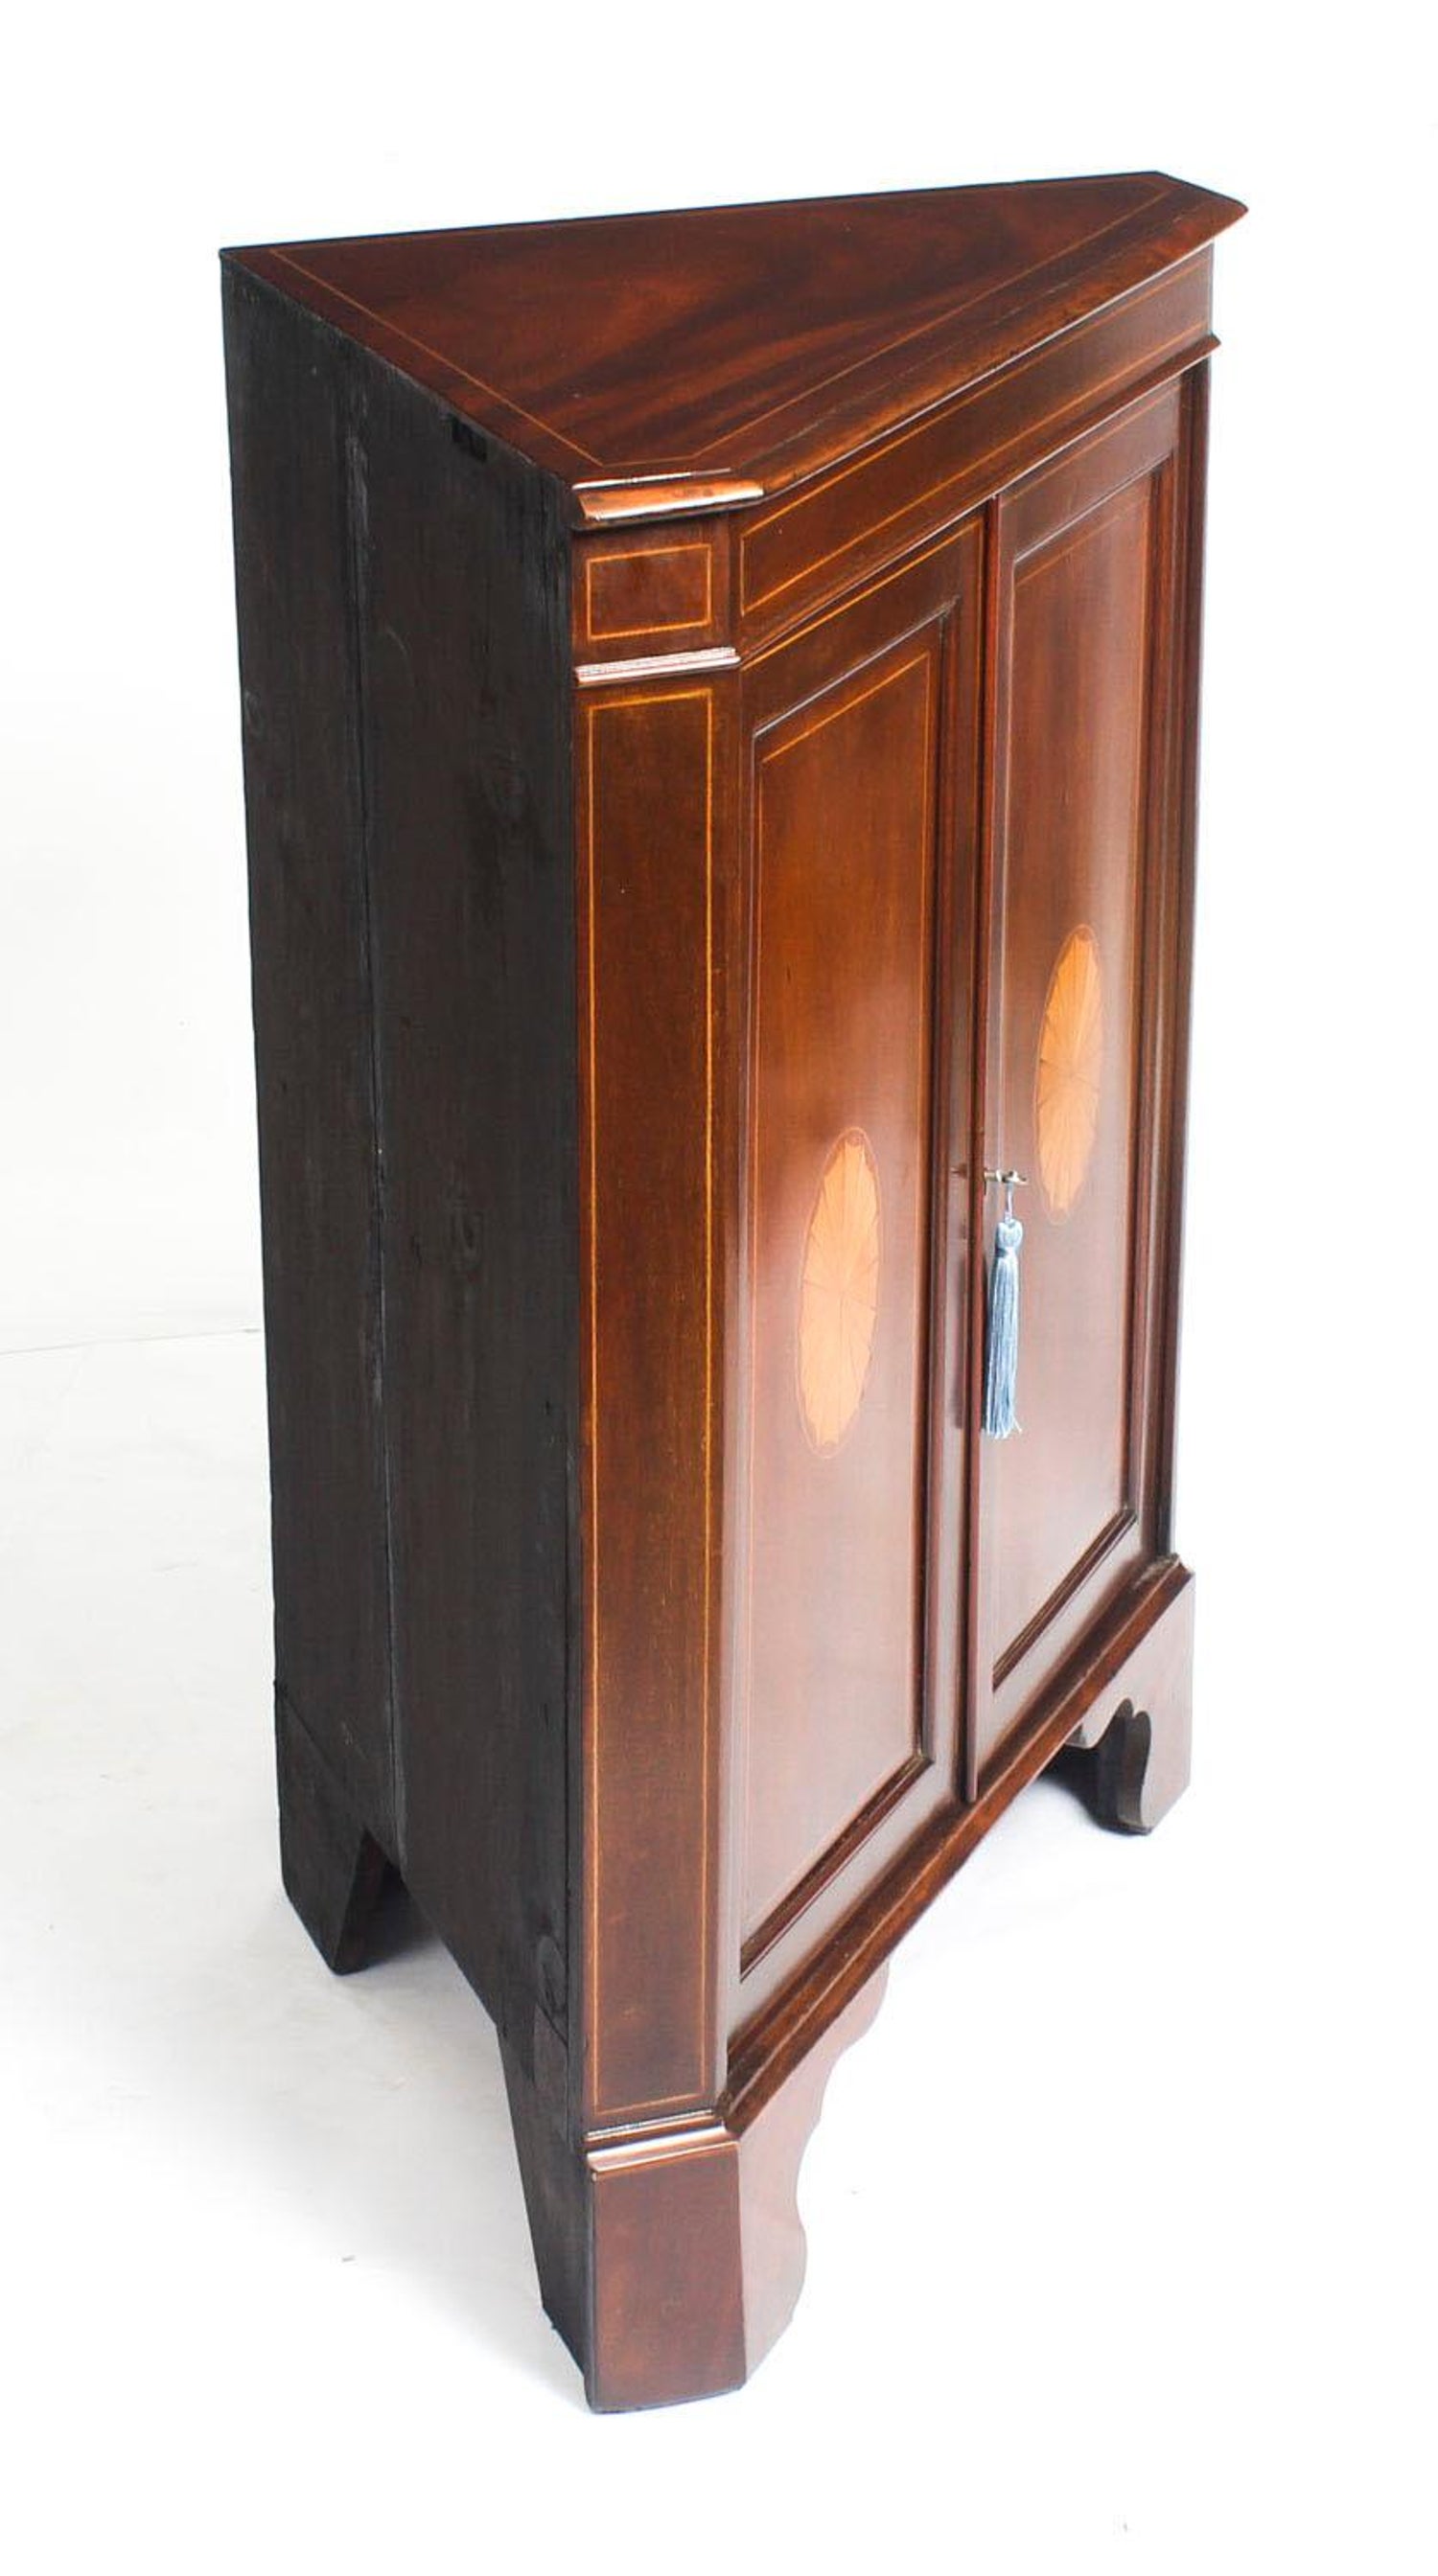 Early 20th Century Mahogany And Satinwood Inlaid Low Corner